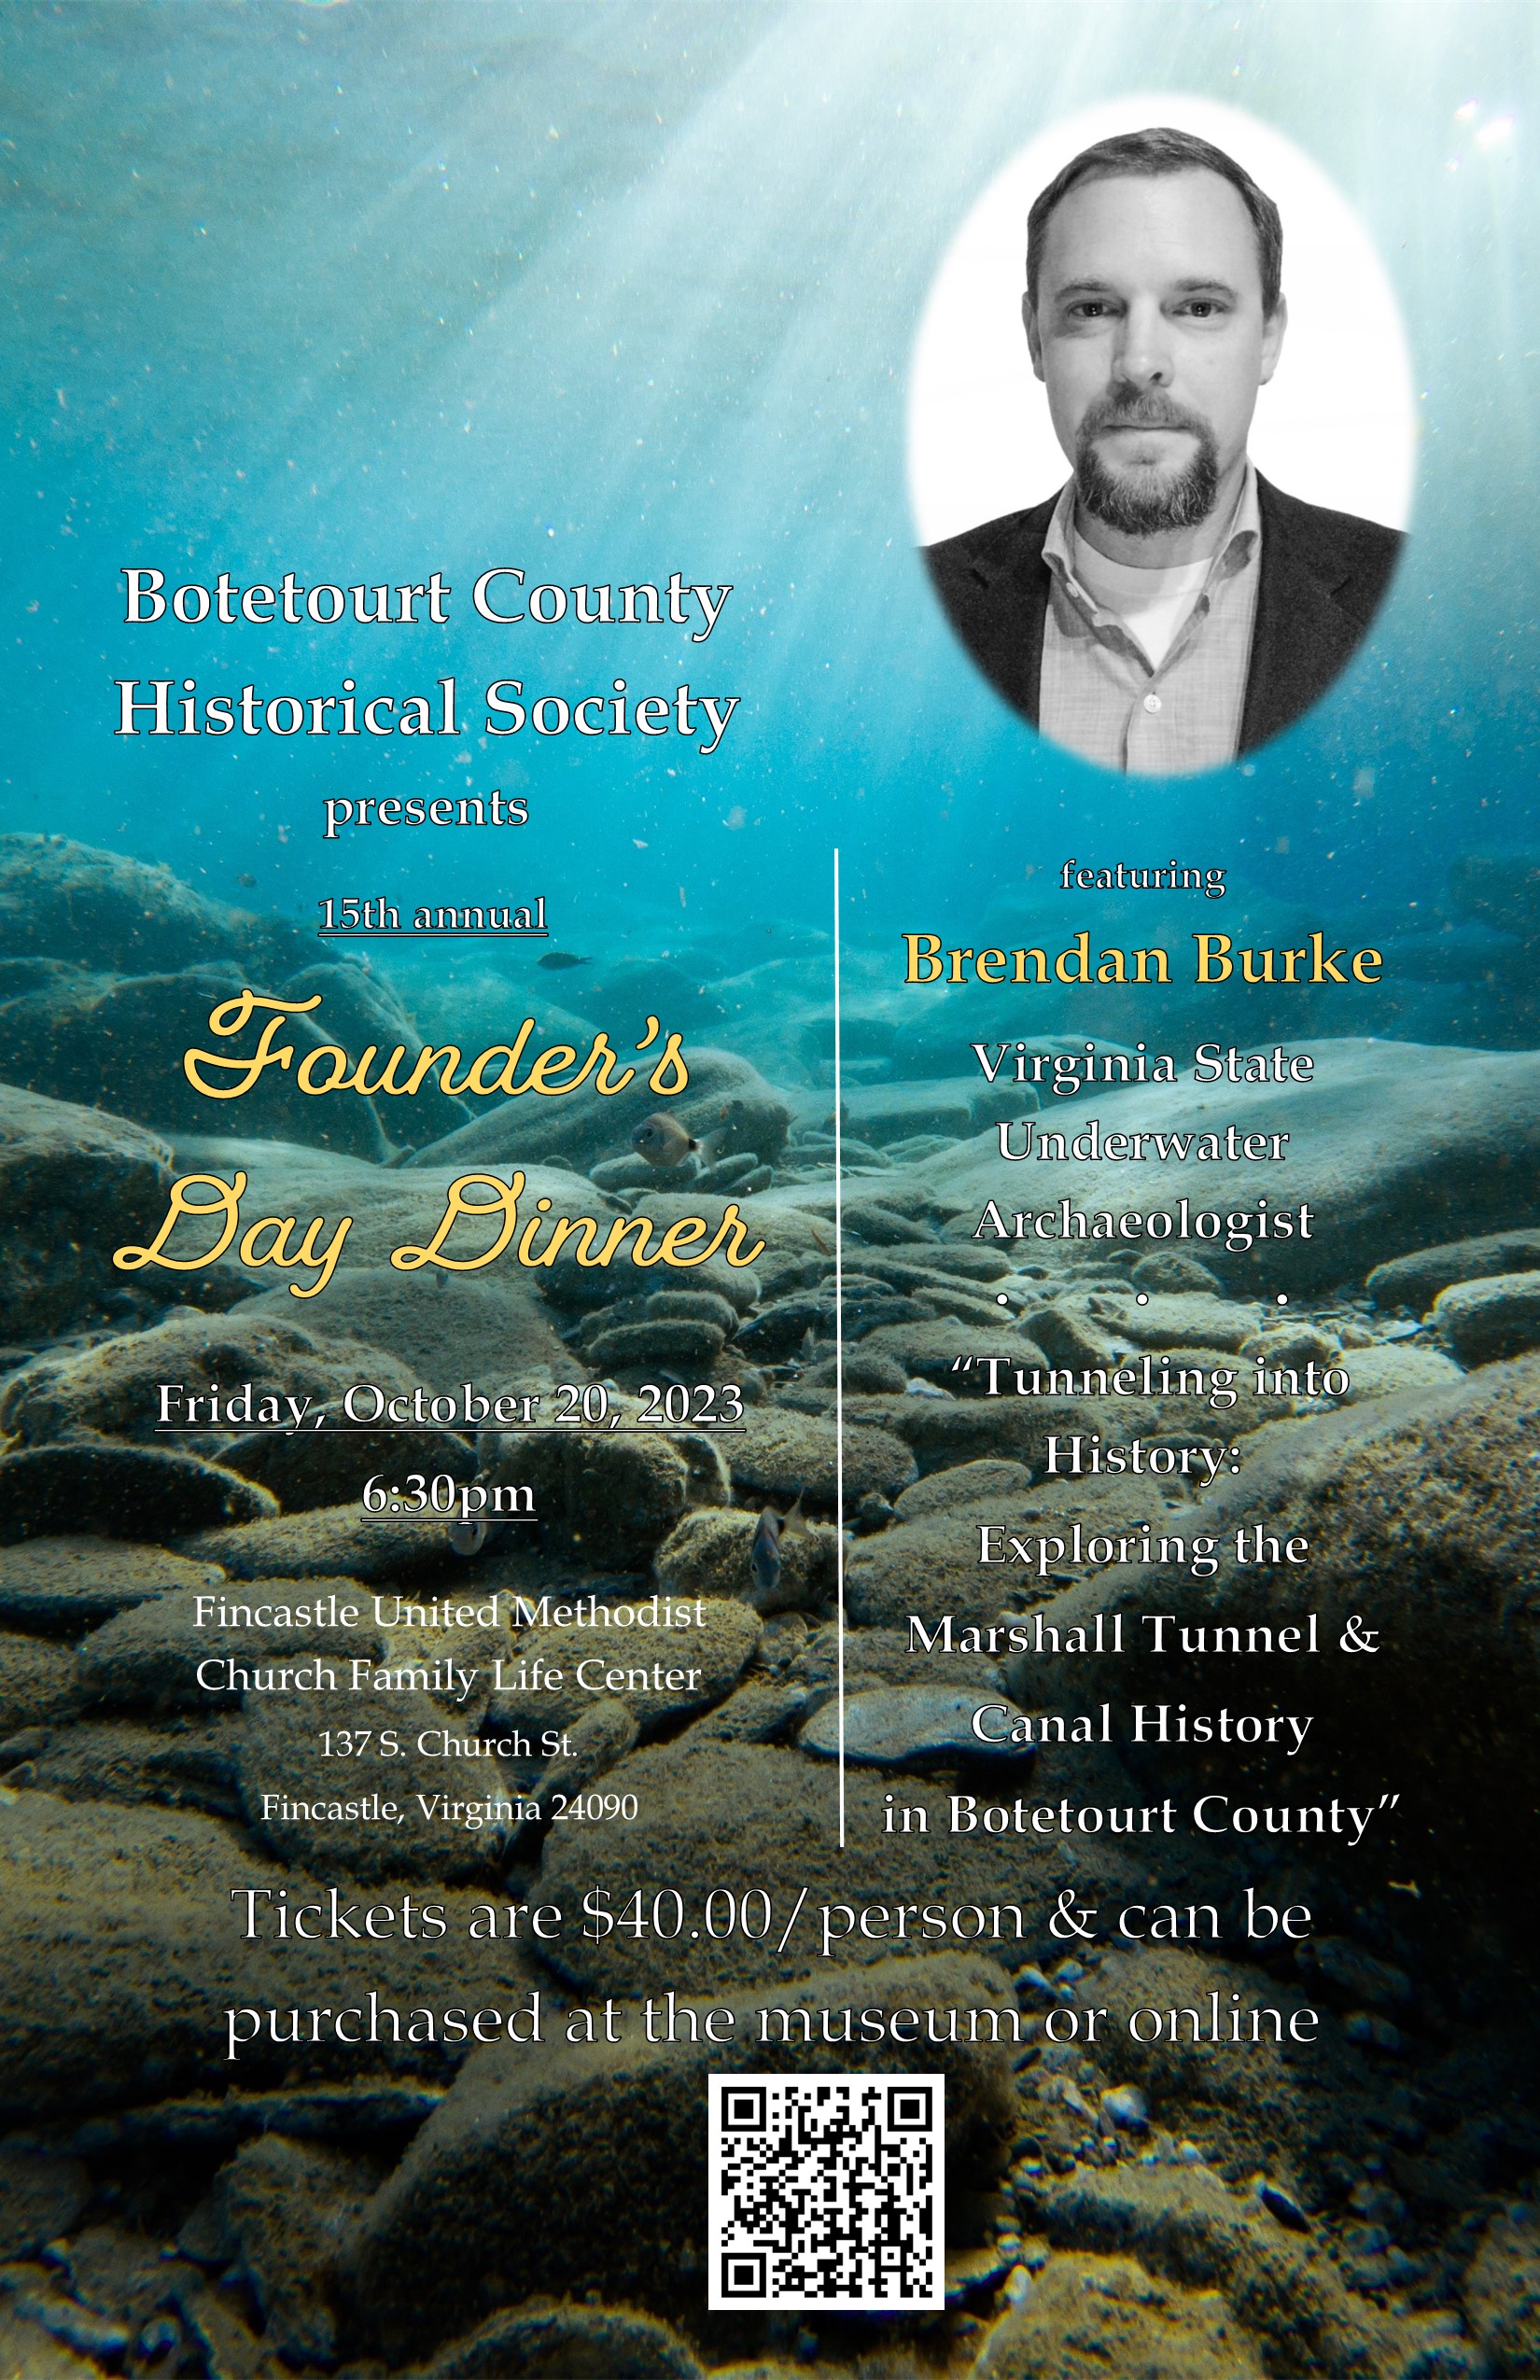 Botetourt County Historical Society -  Tunneling into History: Exploring the Marshall Tunnel & Canal History in Botetourt County